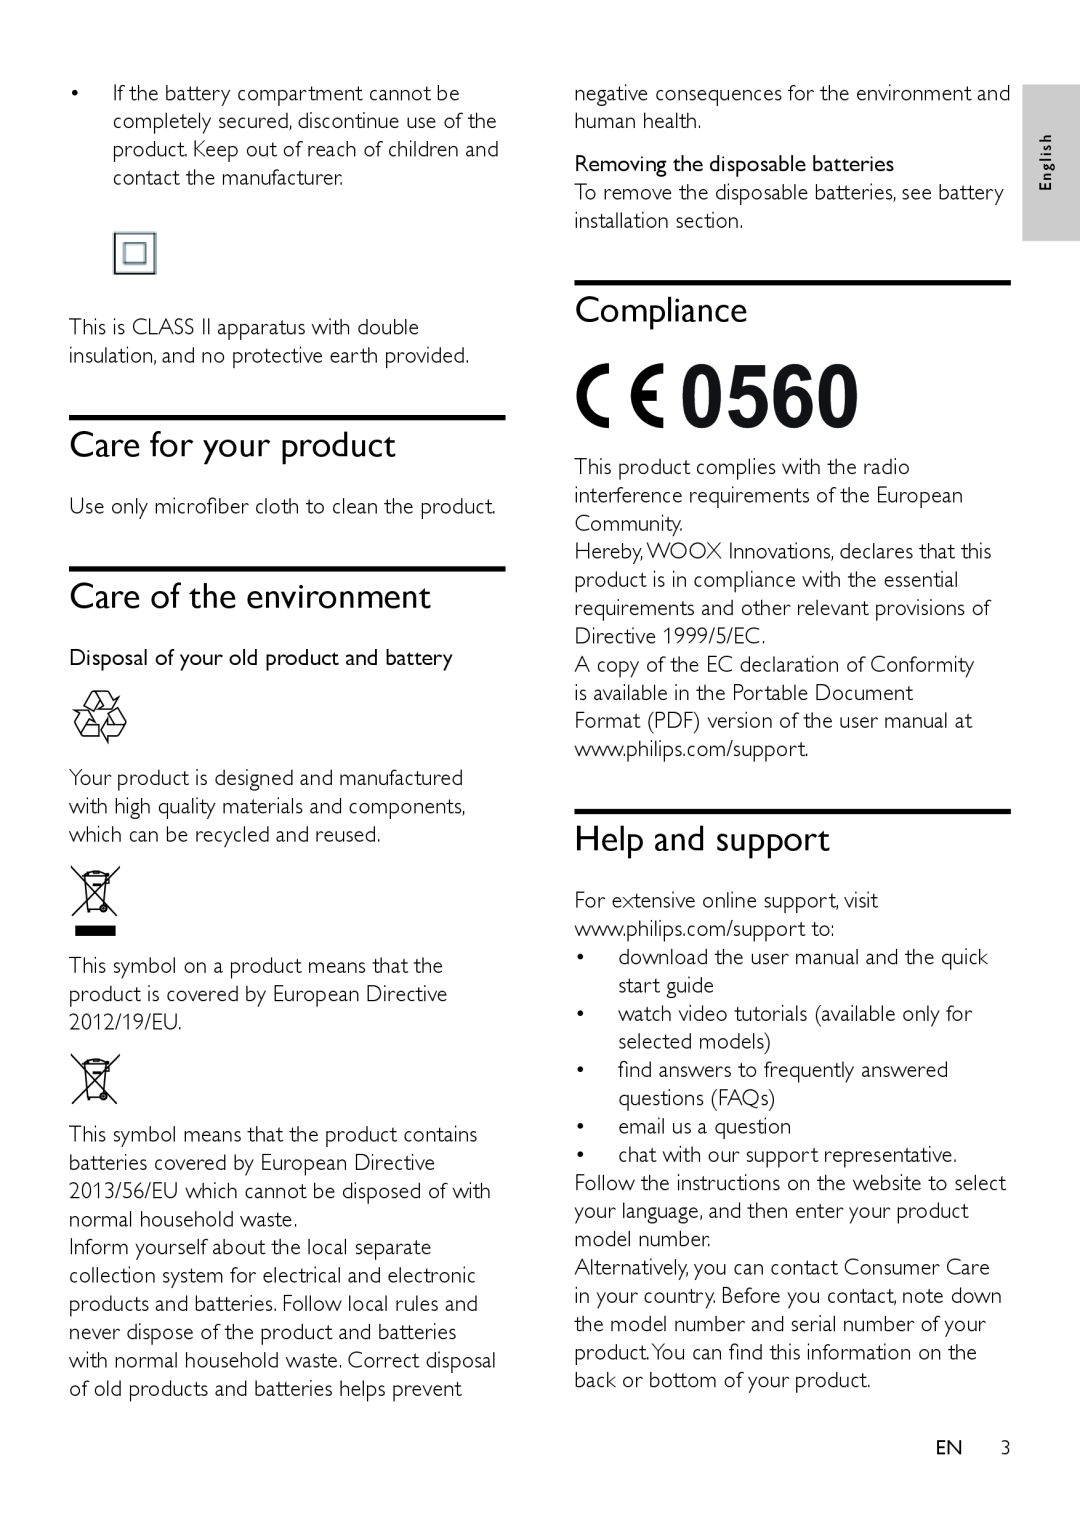 Philips HTL9100 user manual Care for your product, Care of the environment, Compliance, Help and support 